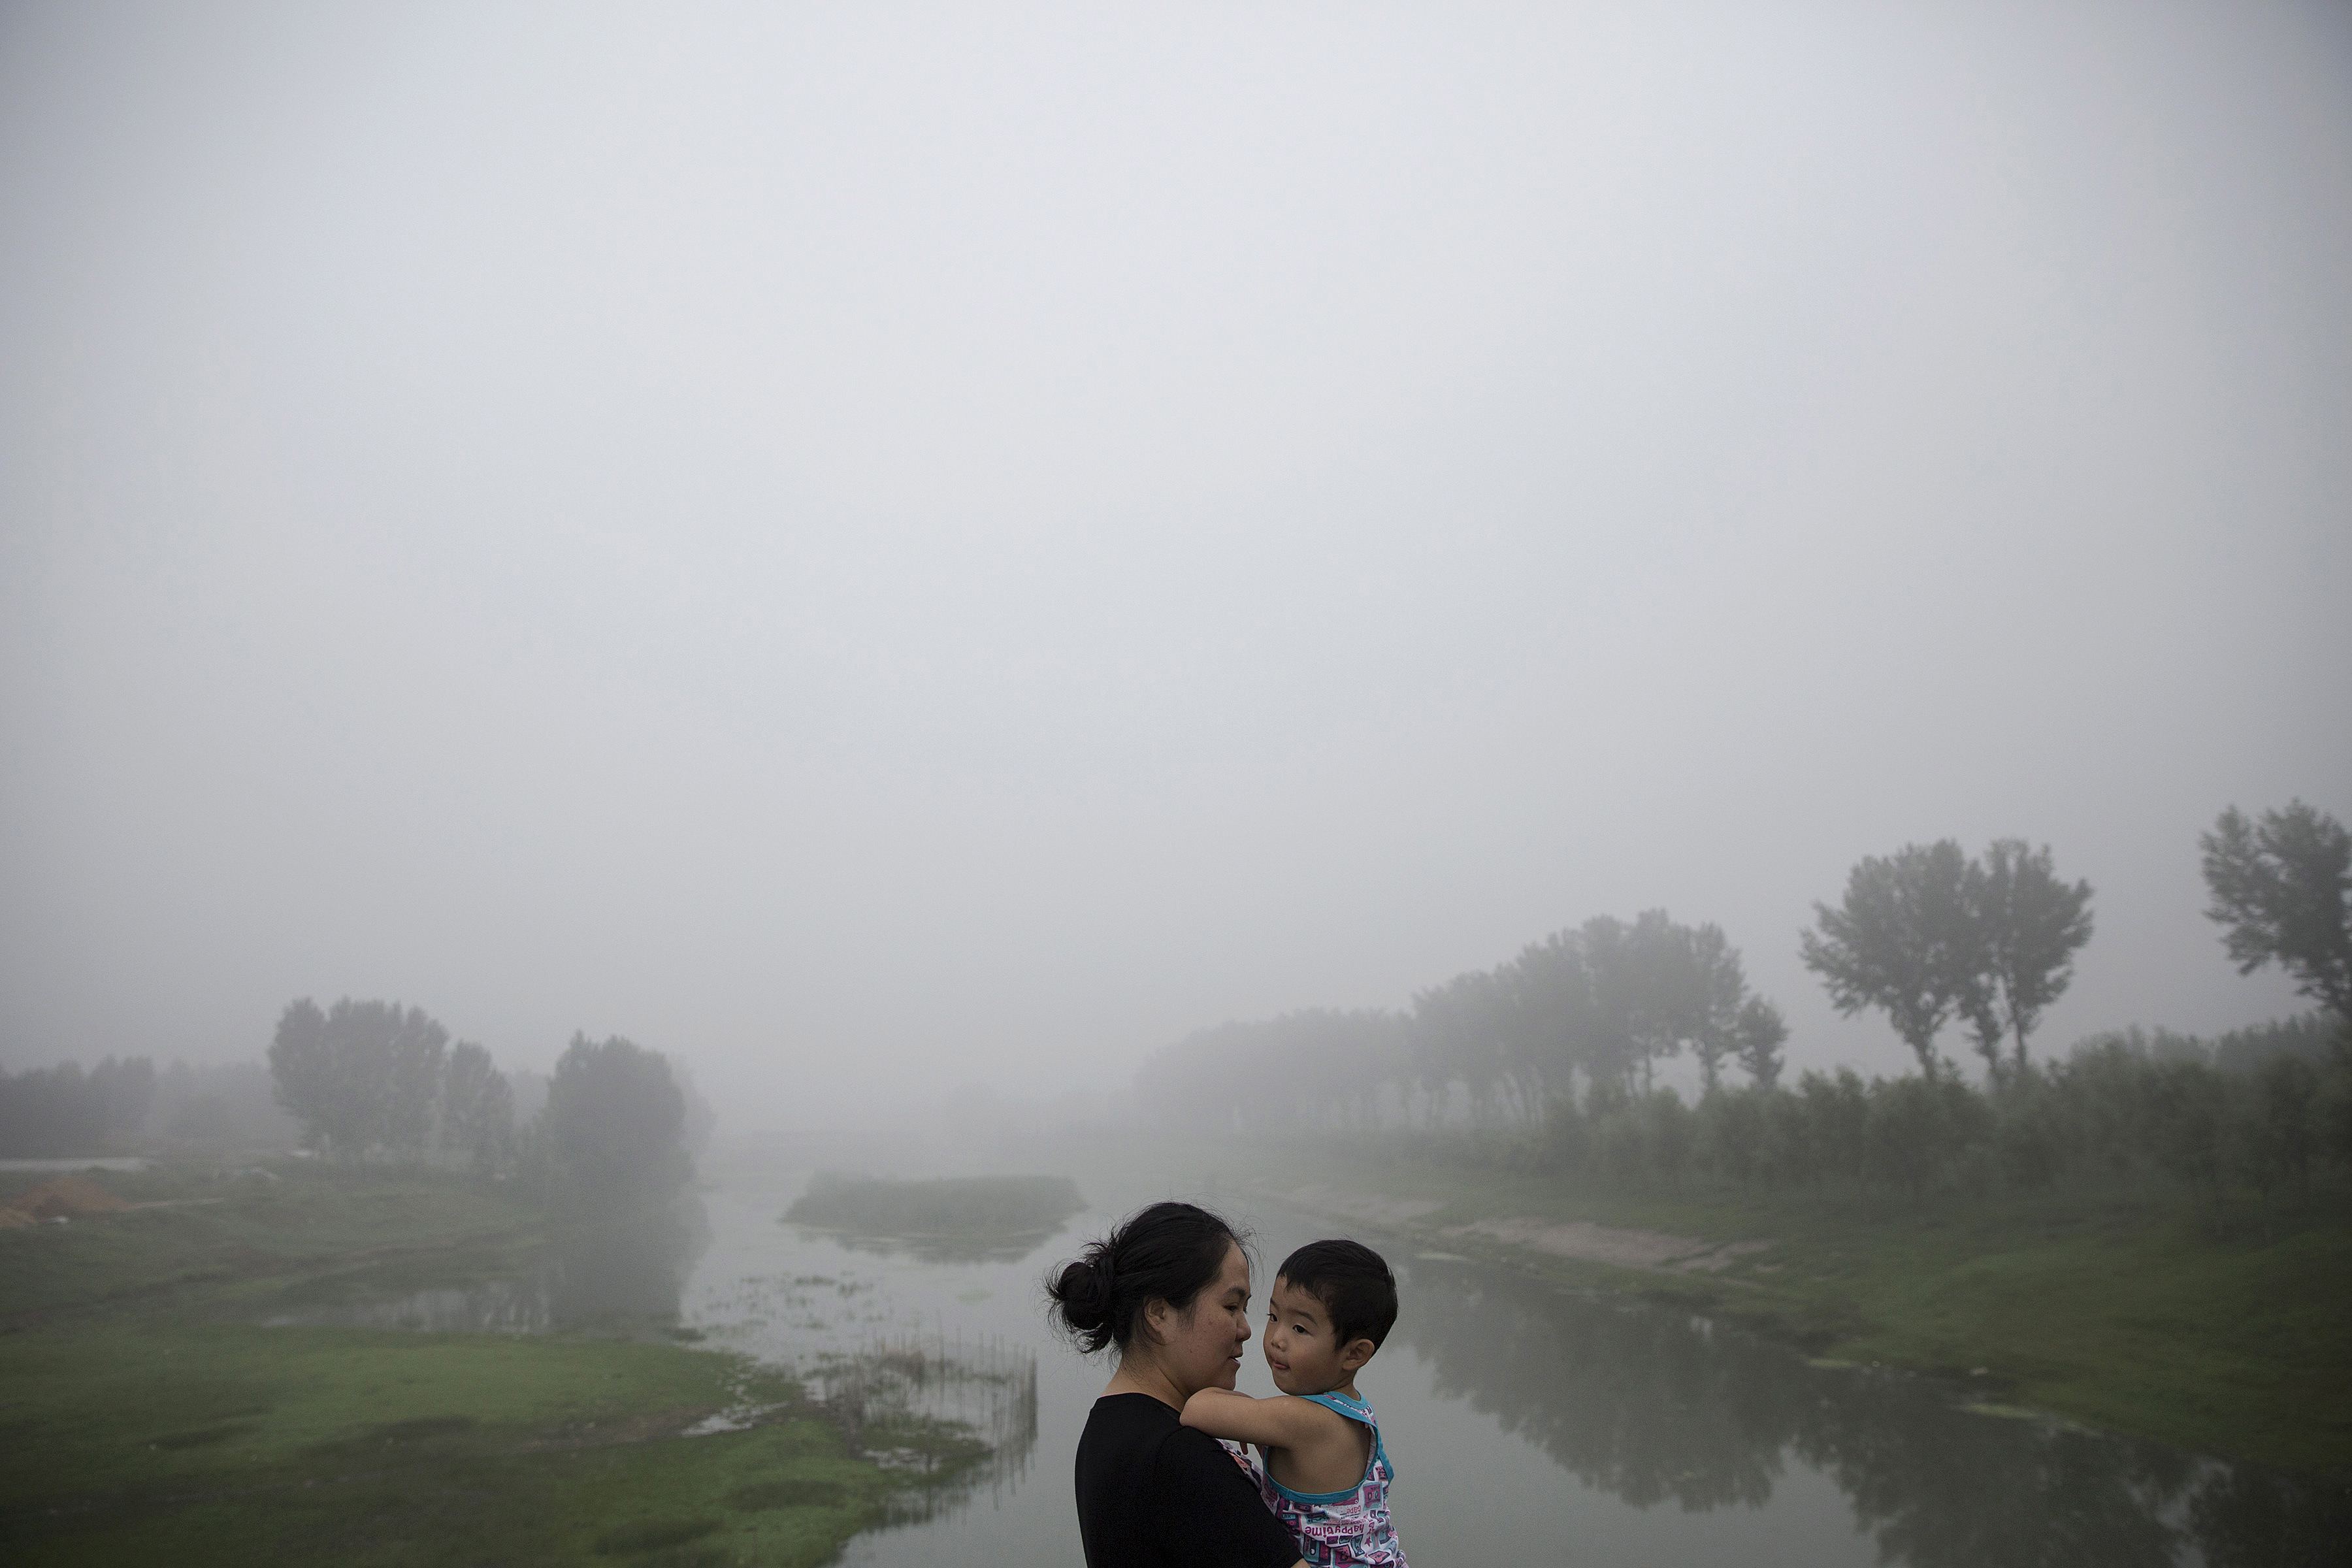 A woman holds a child as travelers wait for the highway from Beijing to China's Hebei Province to reopen after it was closed due to low visibility, on a heavily polluted morning on Aug. 3, 2015. (Damir Sagolj—Reuters)